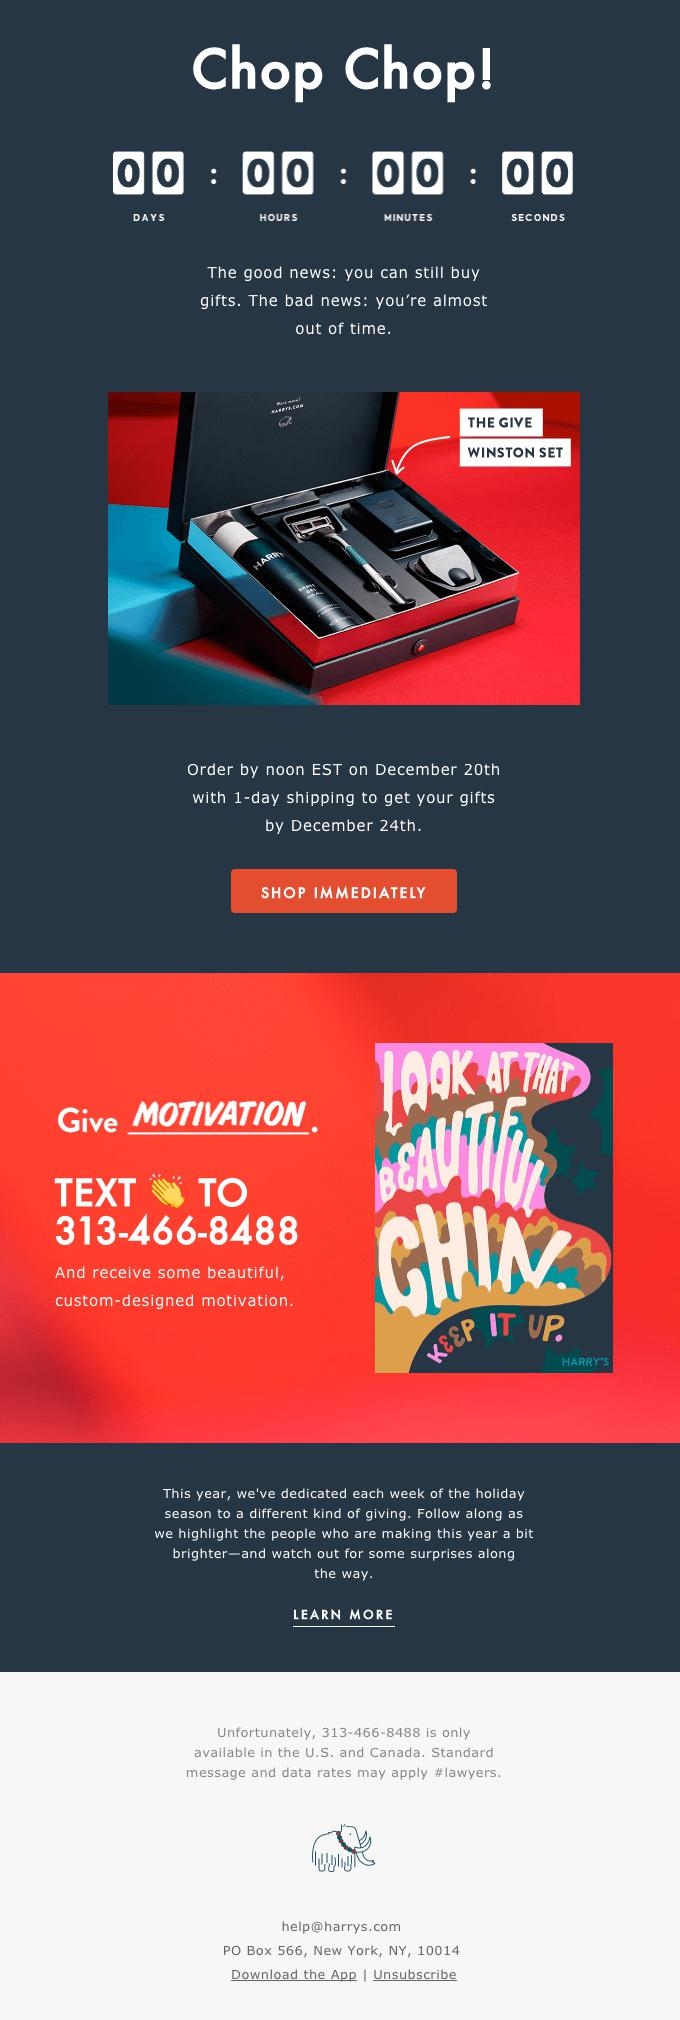 7 Inspiring Minimalistic Email Designs to Spice Up Your Email Campaign